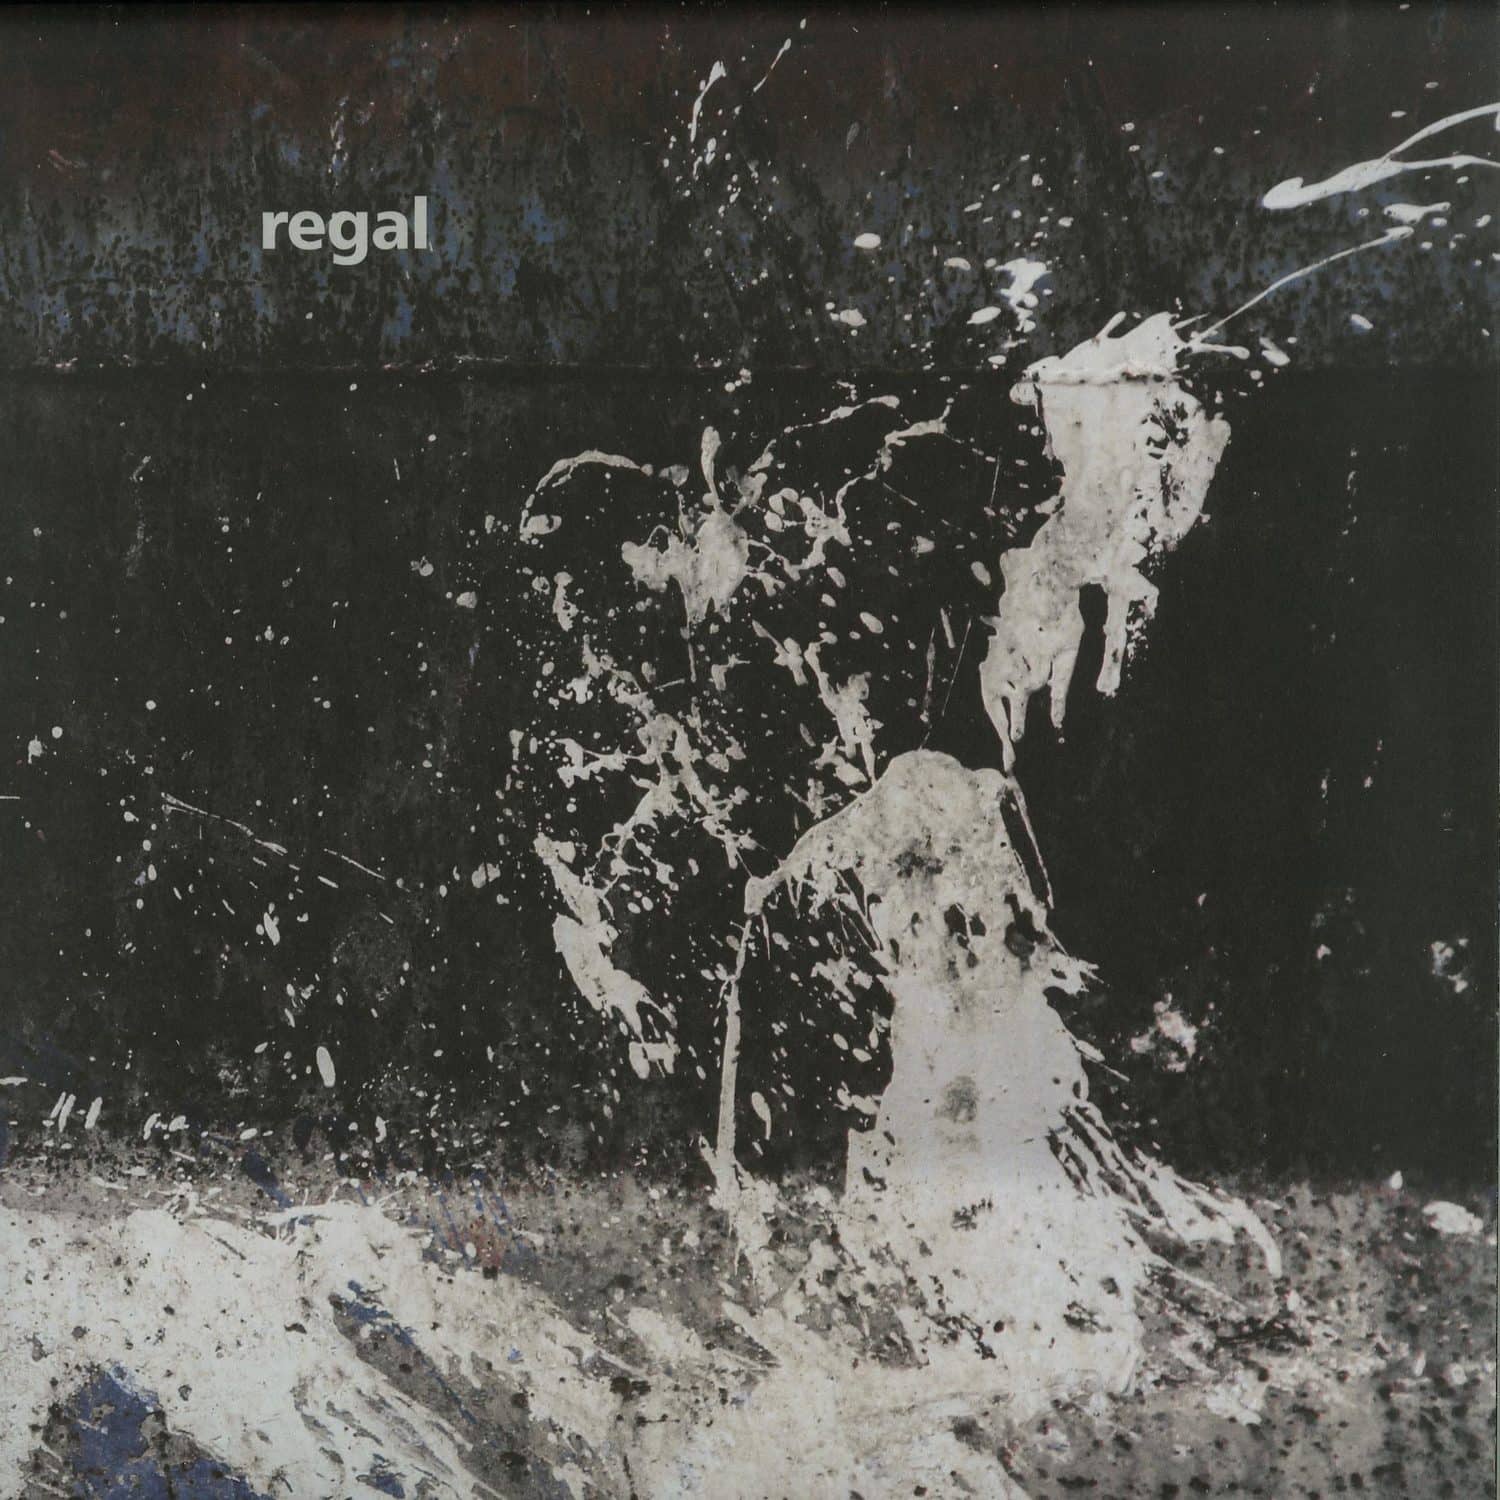 Regal - FROM OTHER SOUNDS 